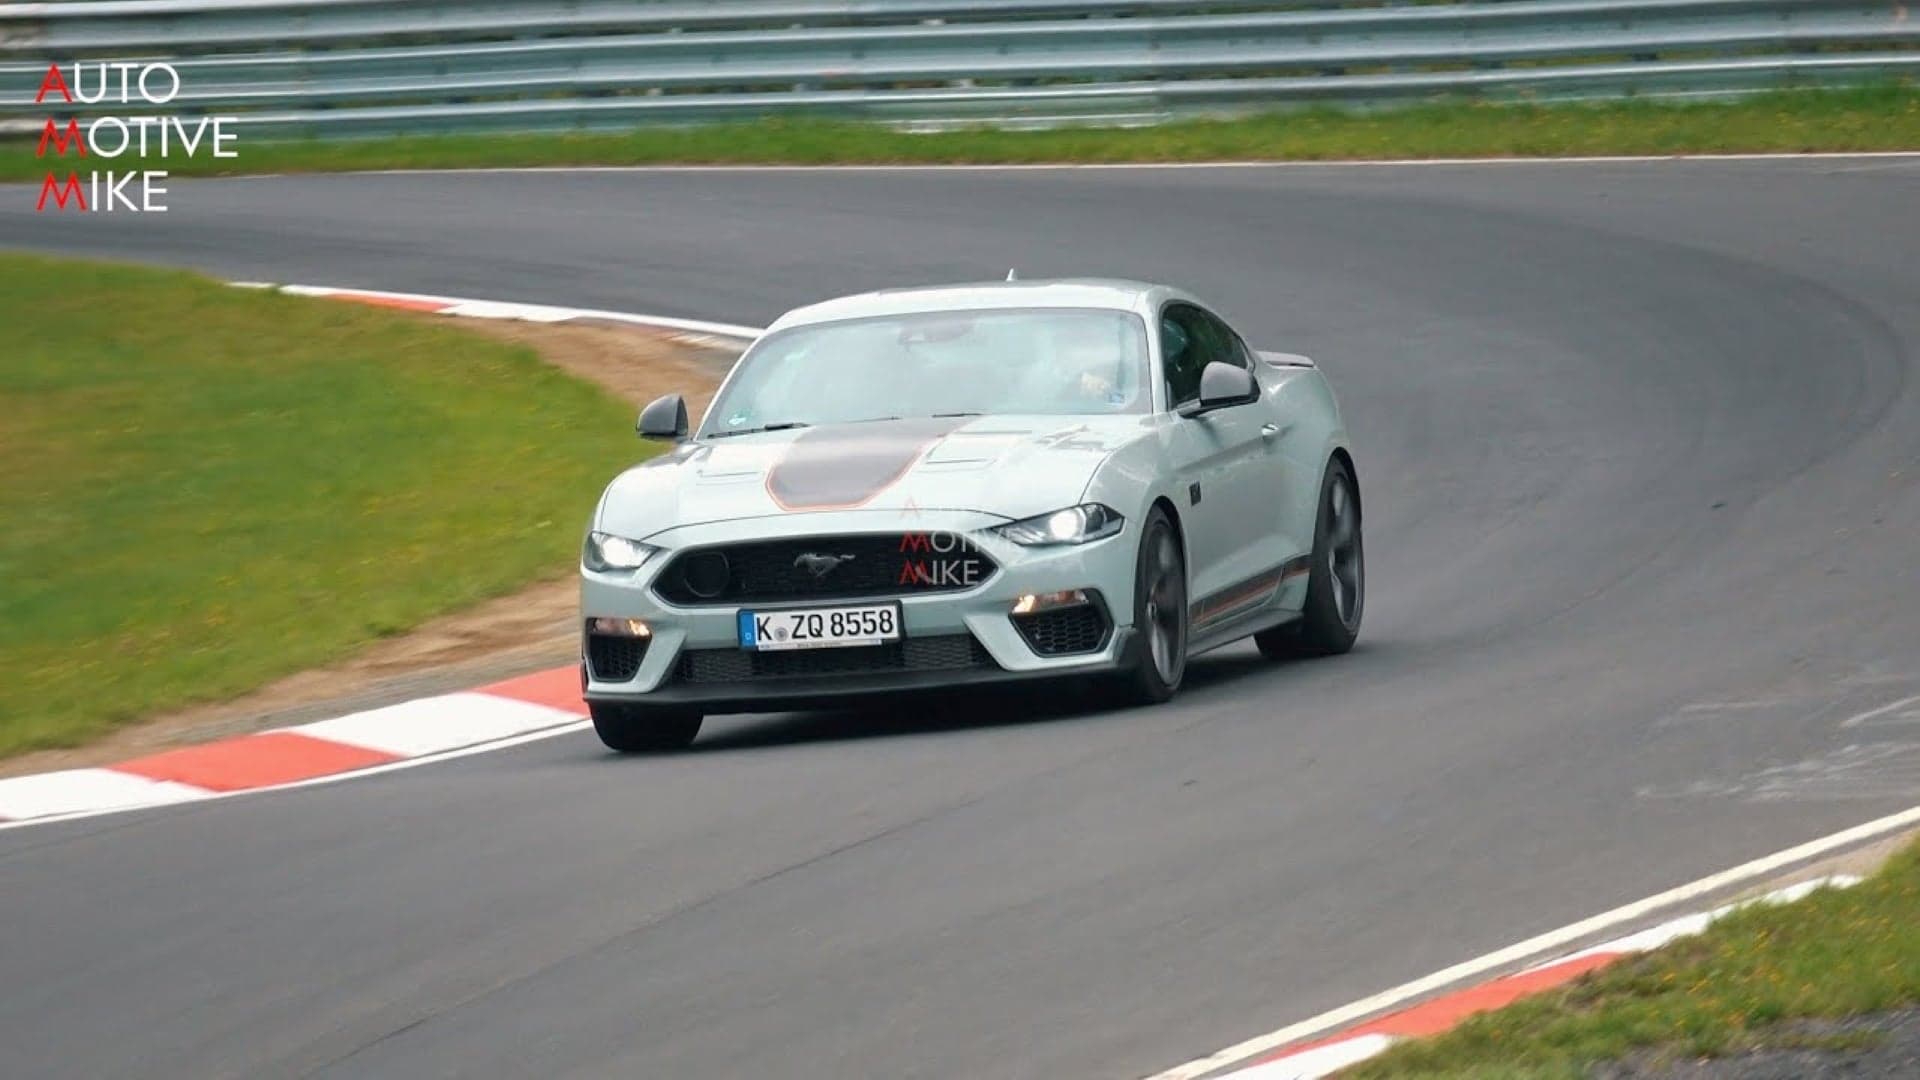 2021 Ford Mustang Mach 1 Flexes Its 480-HP Coyote V8 at the Nurburgring